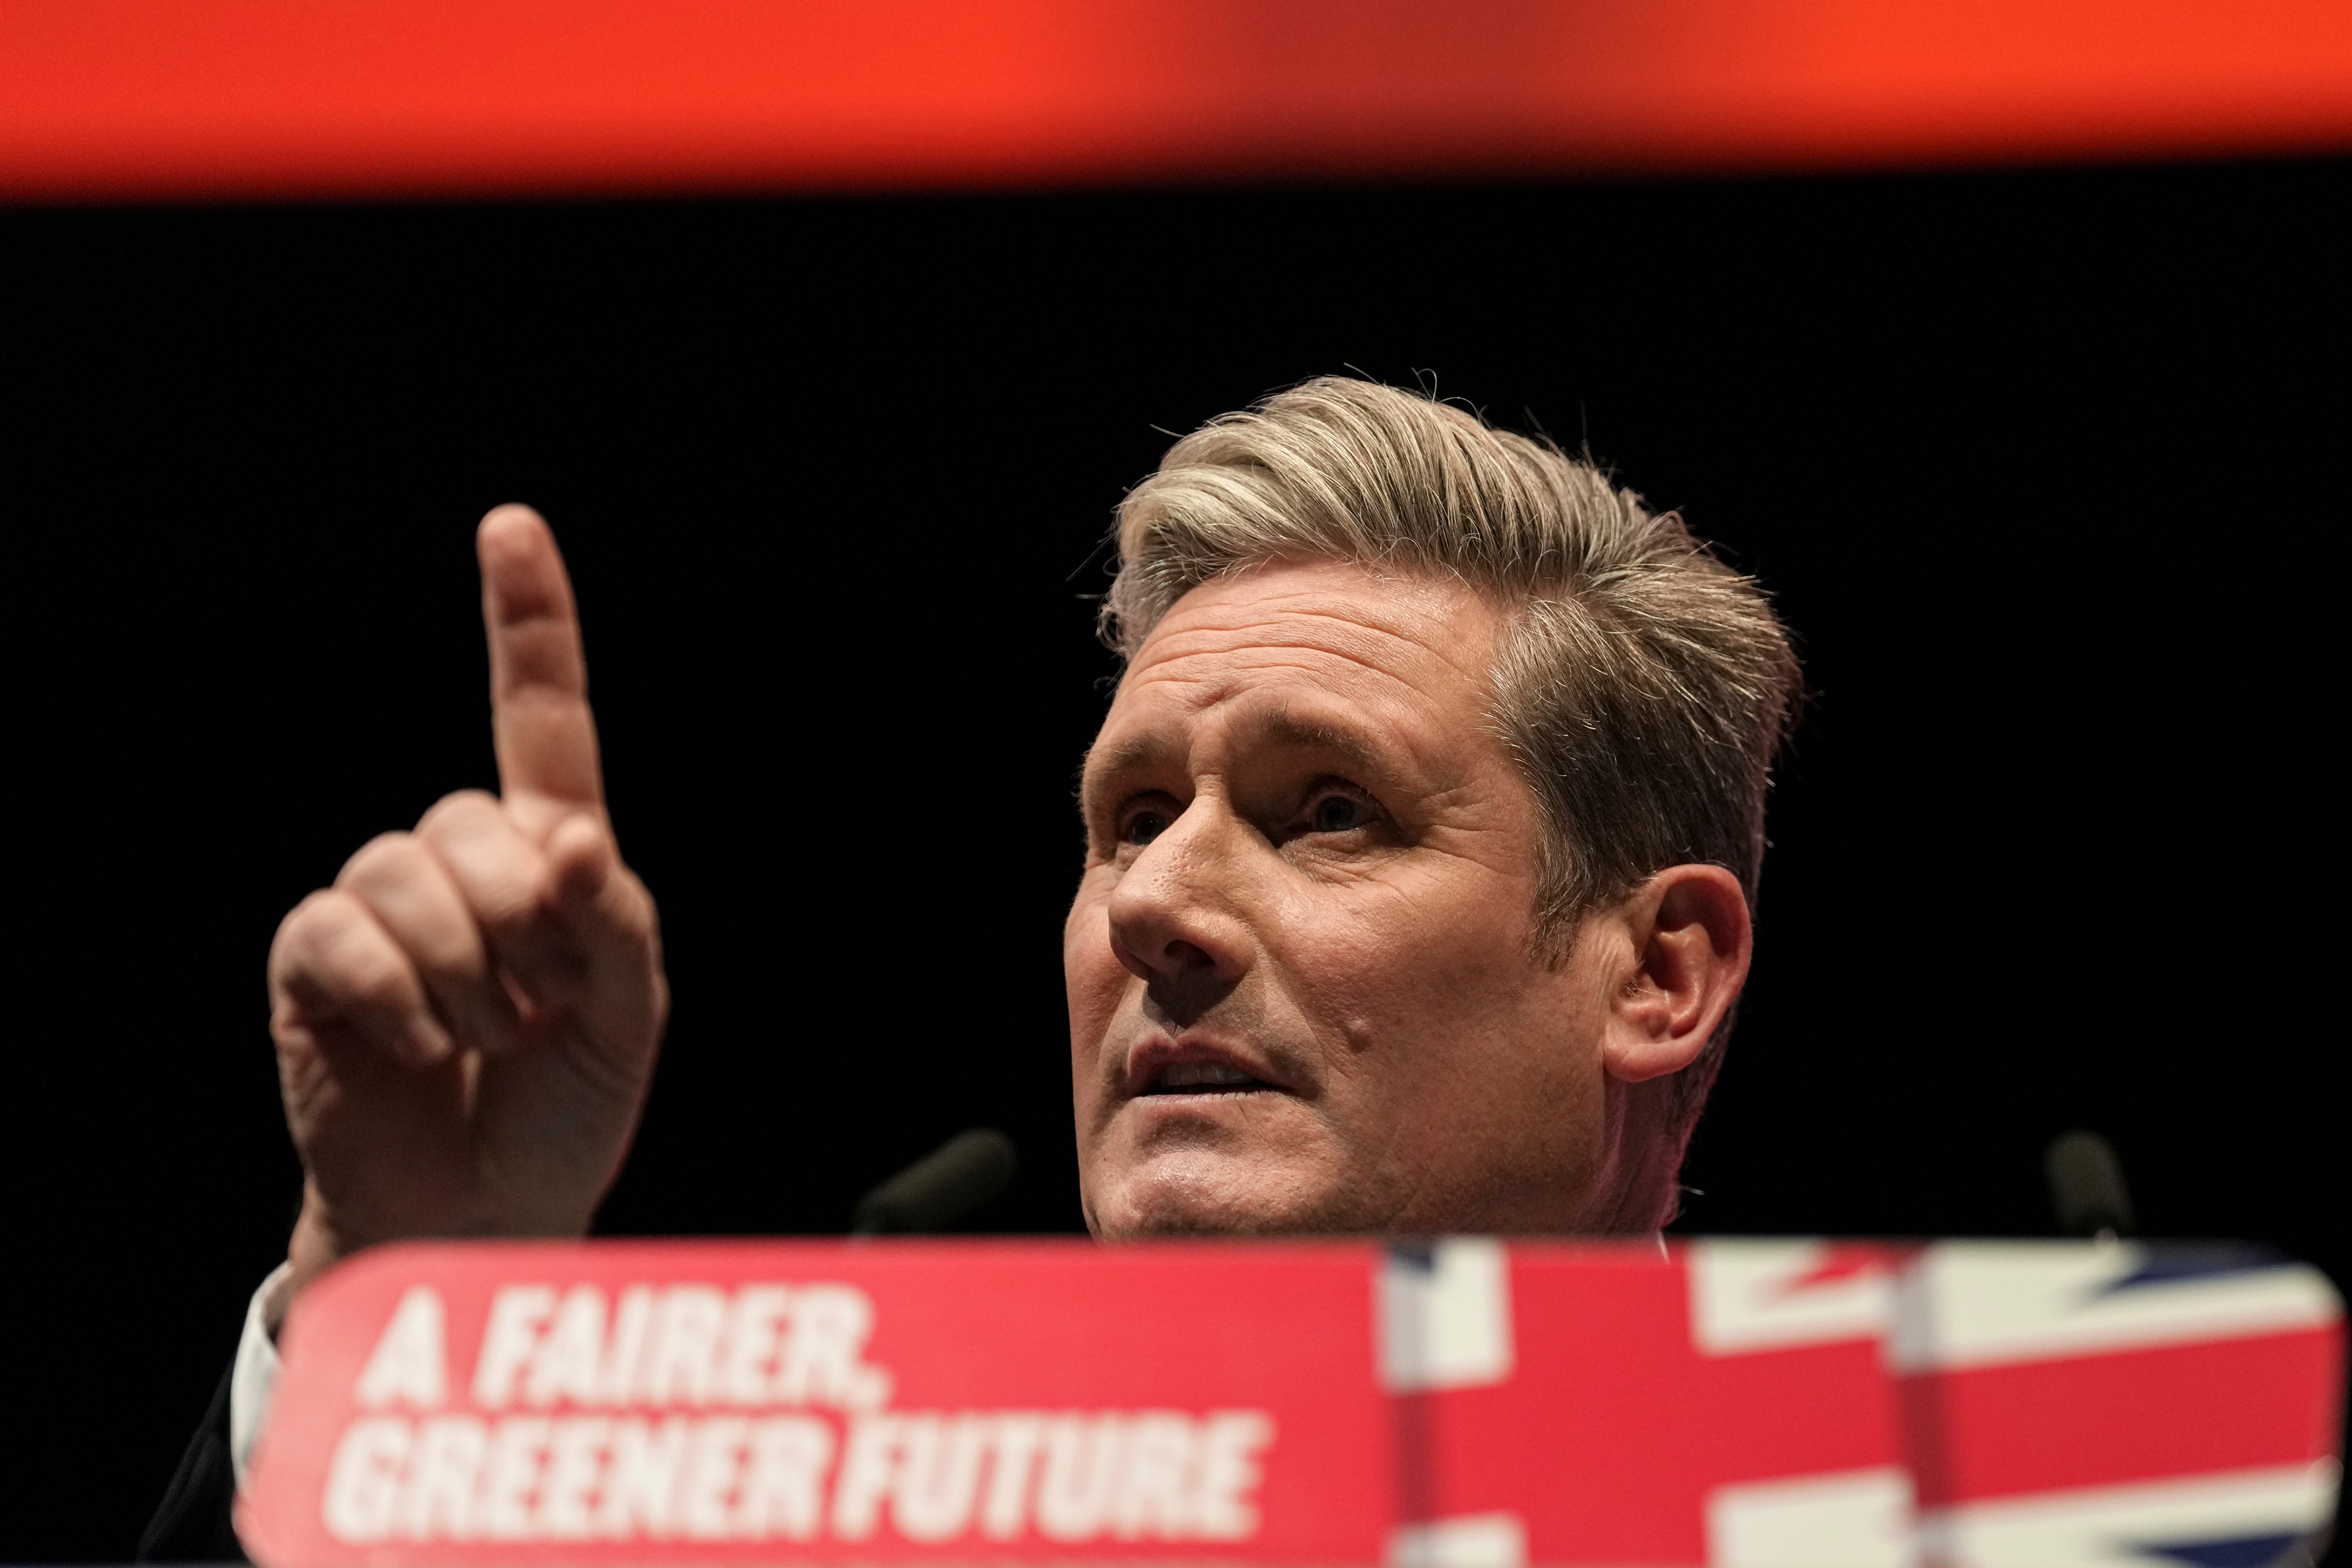 Keir Starmer gave a campaign speech in Kent and branded the election a chance ‘to turn the page’